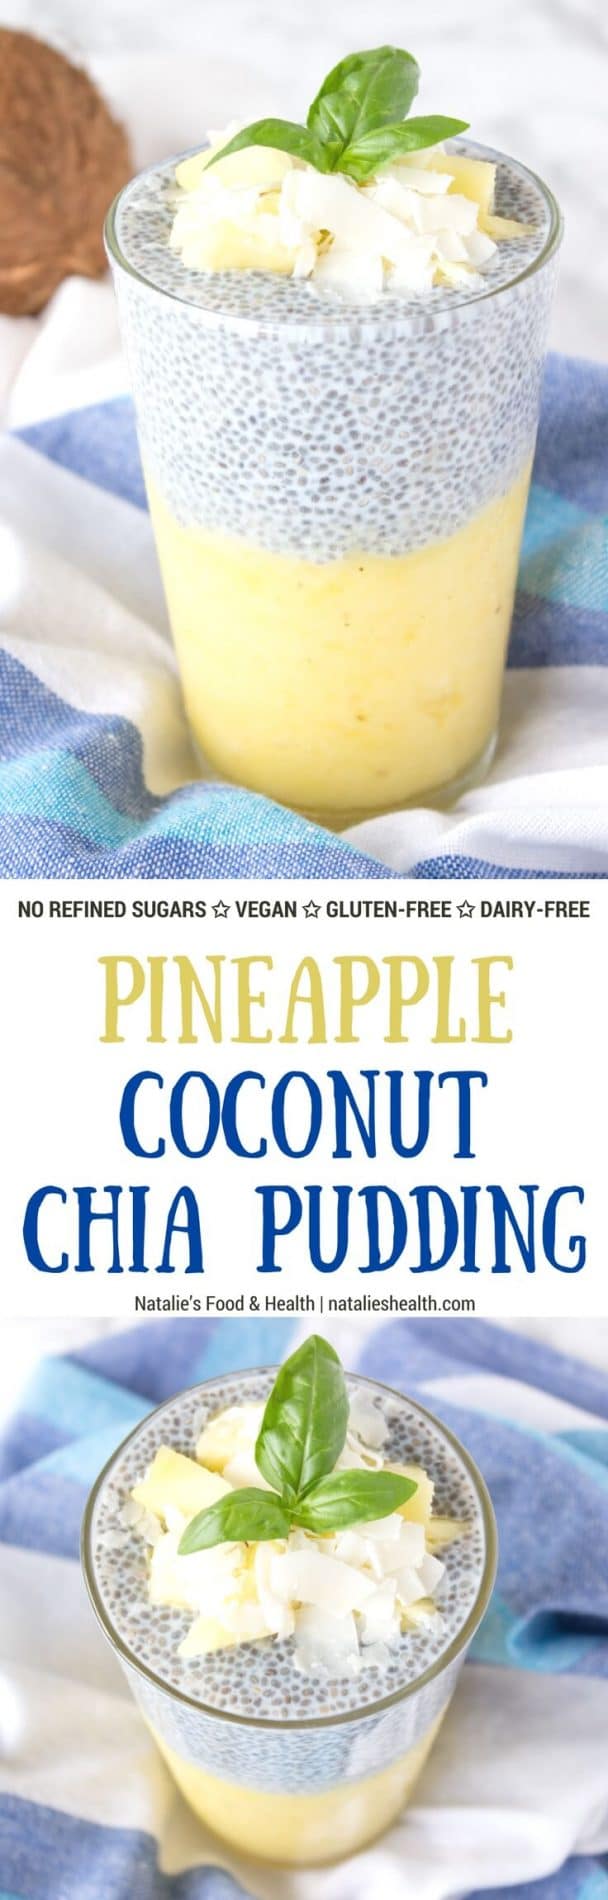 Refreshing and nutritious, Tropical Pineapple Coconut Chia Pudding is an ultimate healthy meal. It's REFINED sugar-free and packed with high-quality plant-based proteins, fibers, healthy omega-3 acids, and vitamins. #vegan #glutenfree #dairyfree #sugarfree #healthy #chia #pineappl #summer #kidfriendly #weightloss #fit | natalieshealth.com